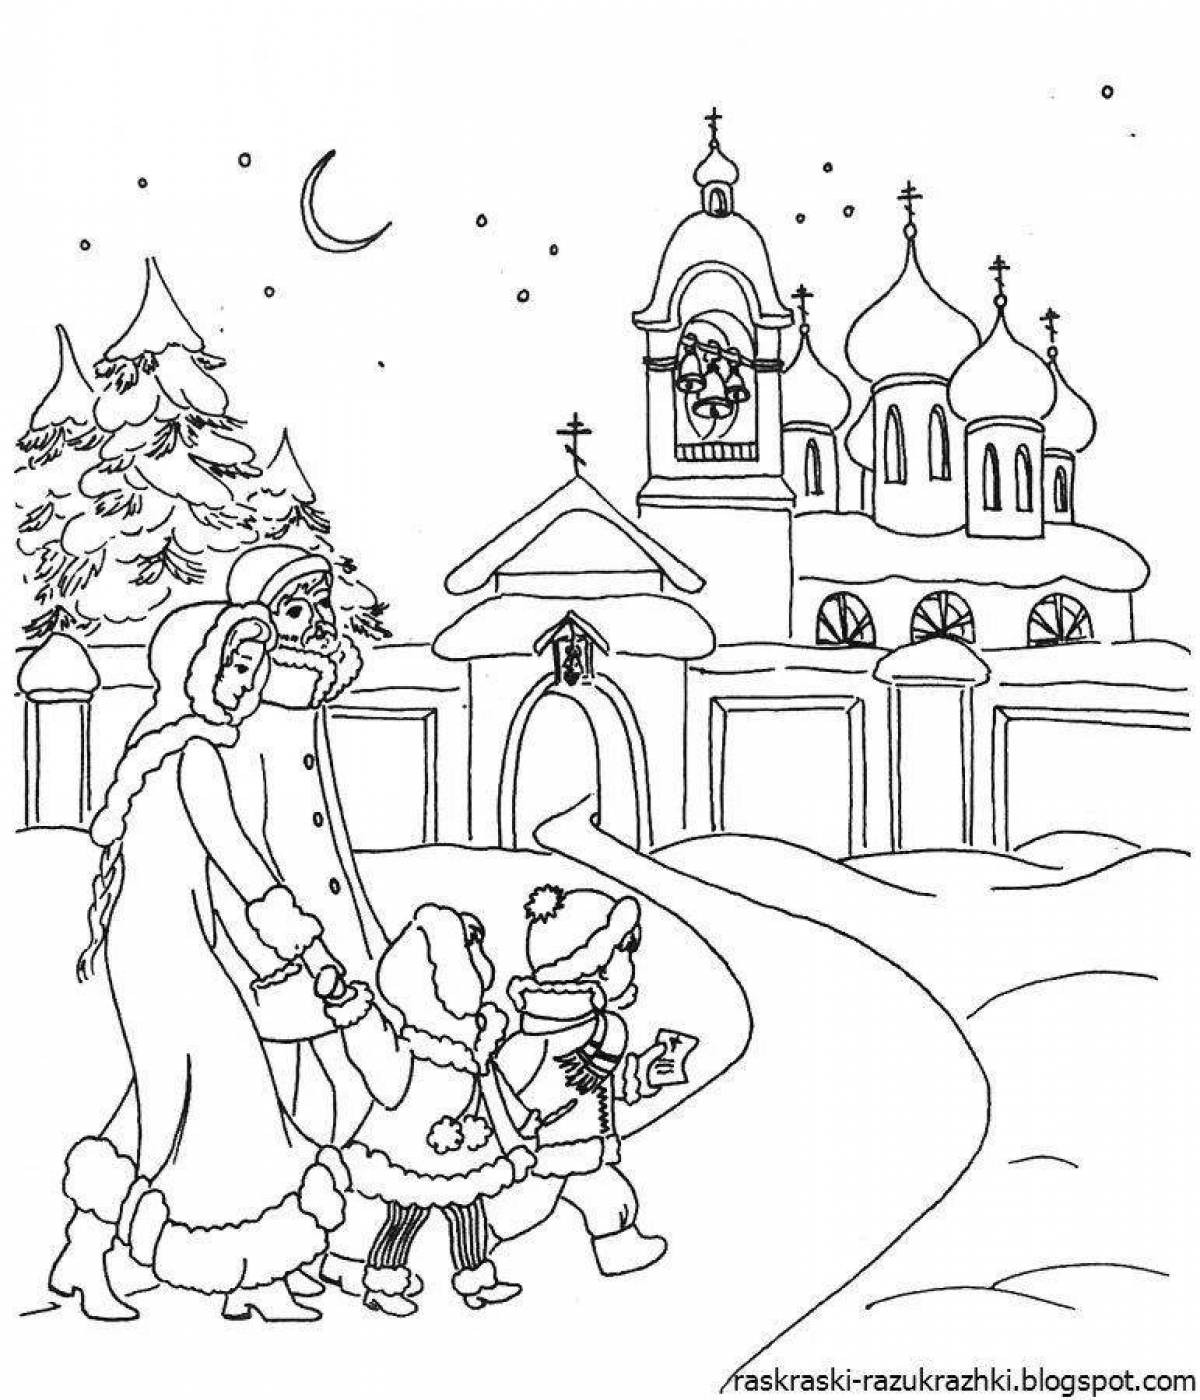 Gorgeous temple coloring book for kids